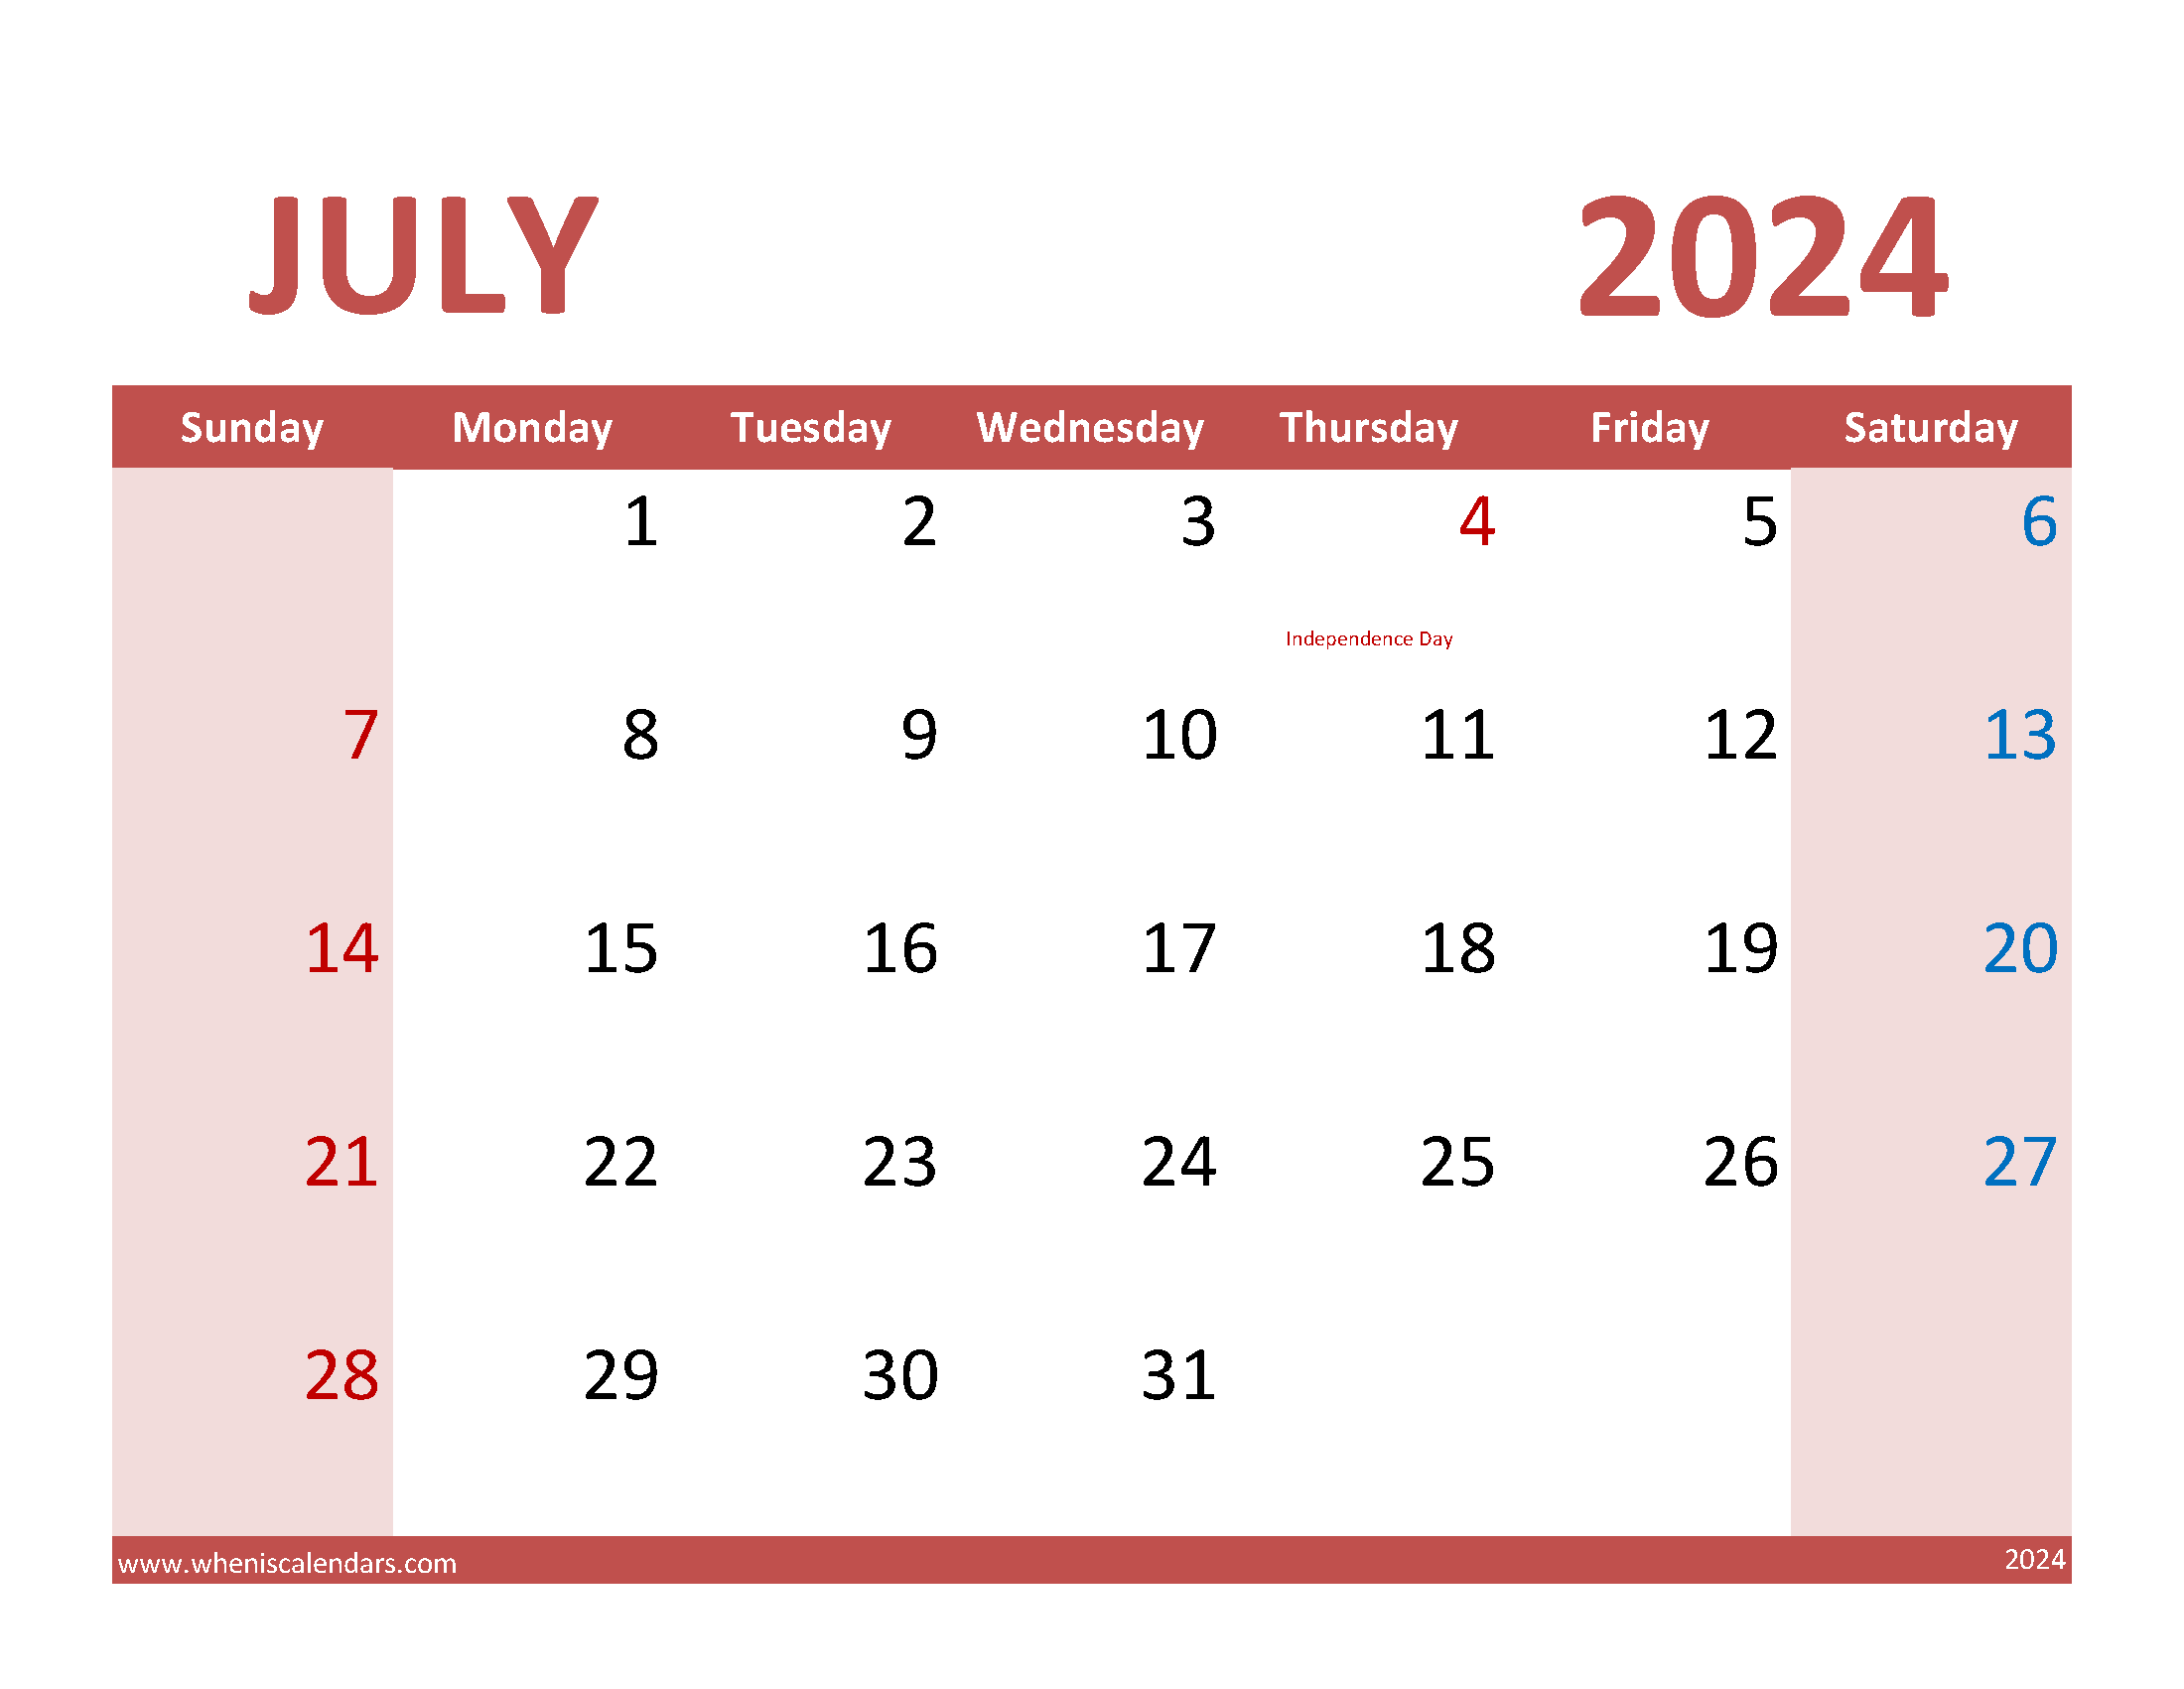 July Calendar 2024 with Holidays